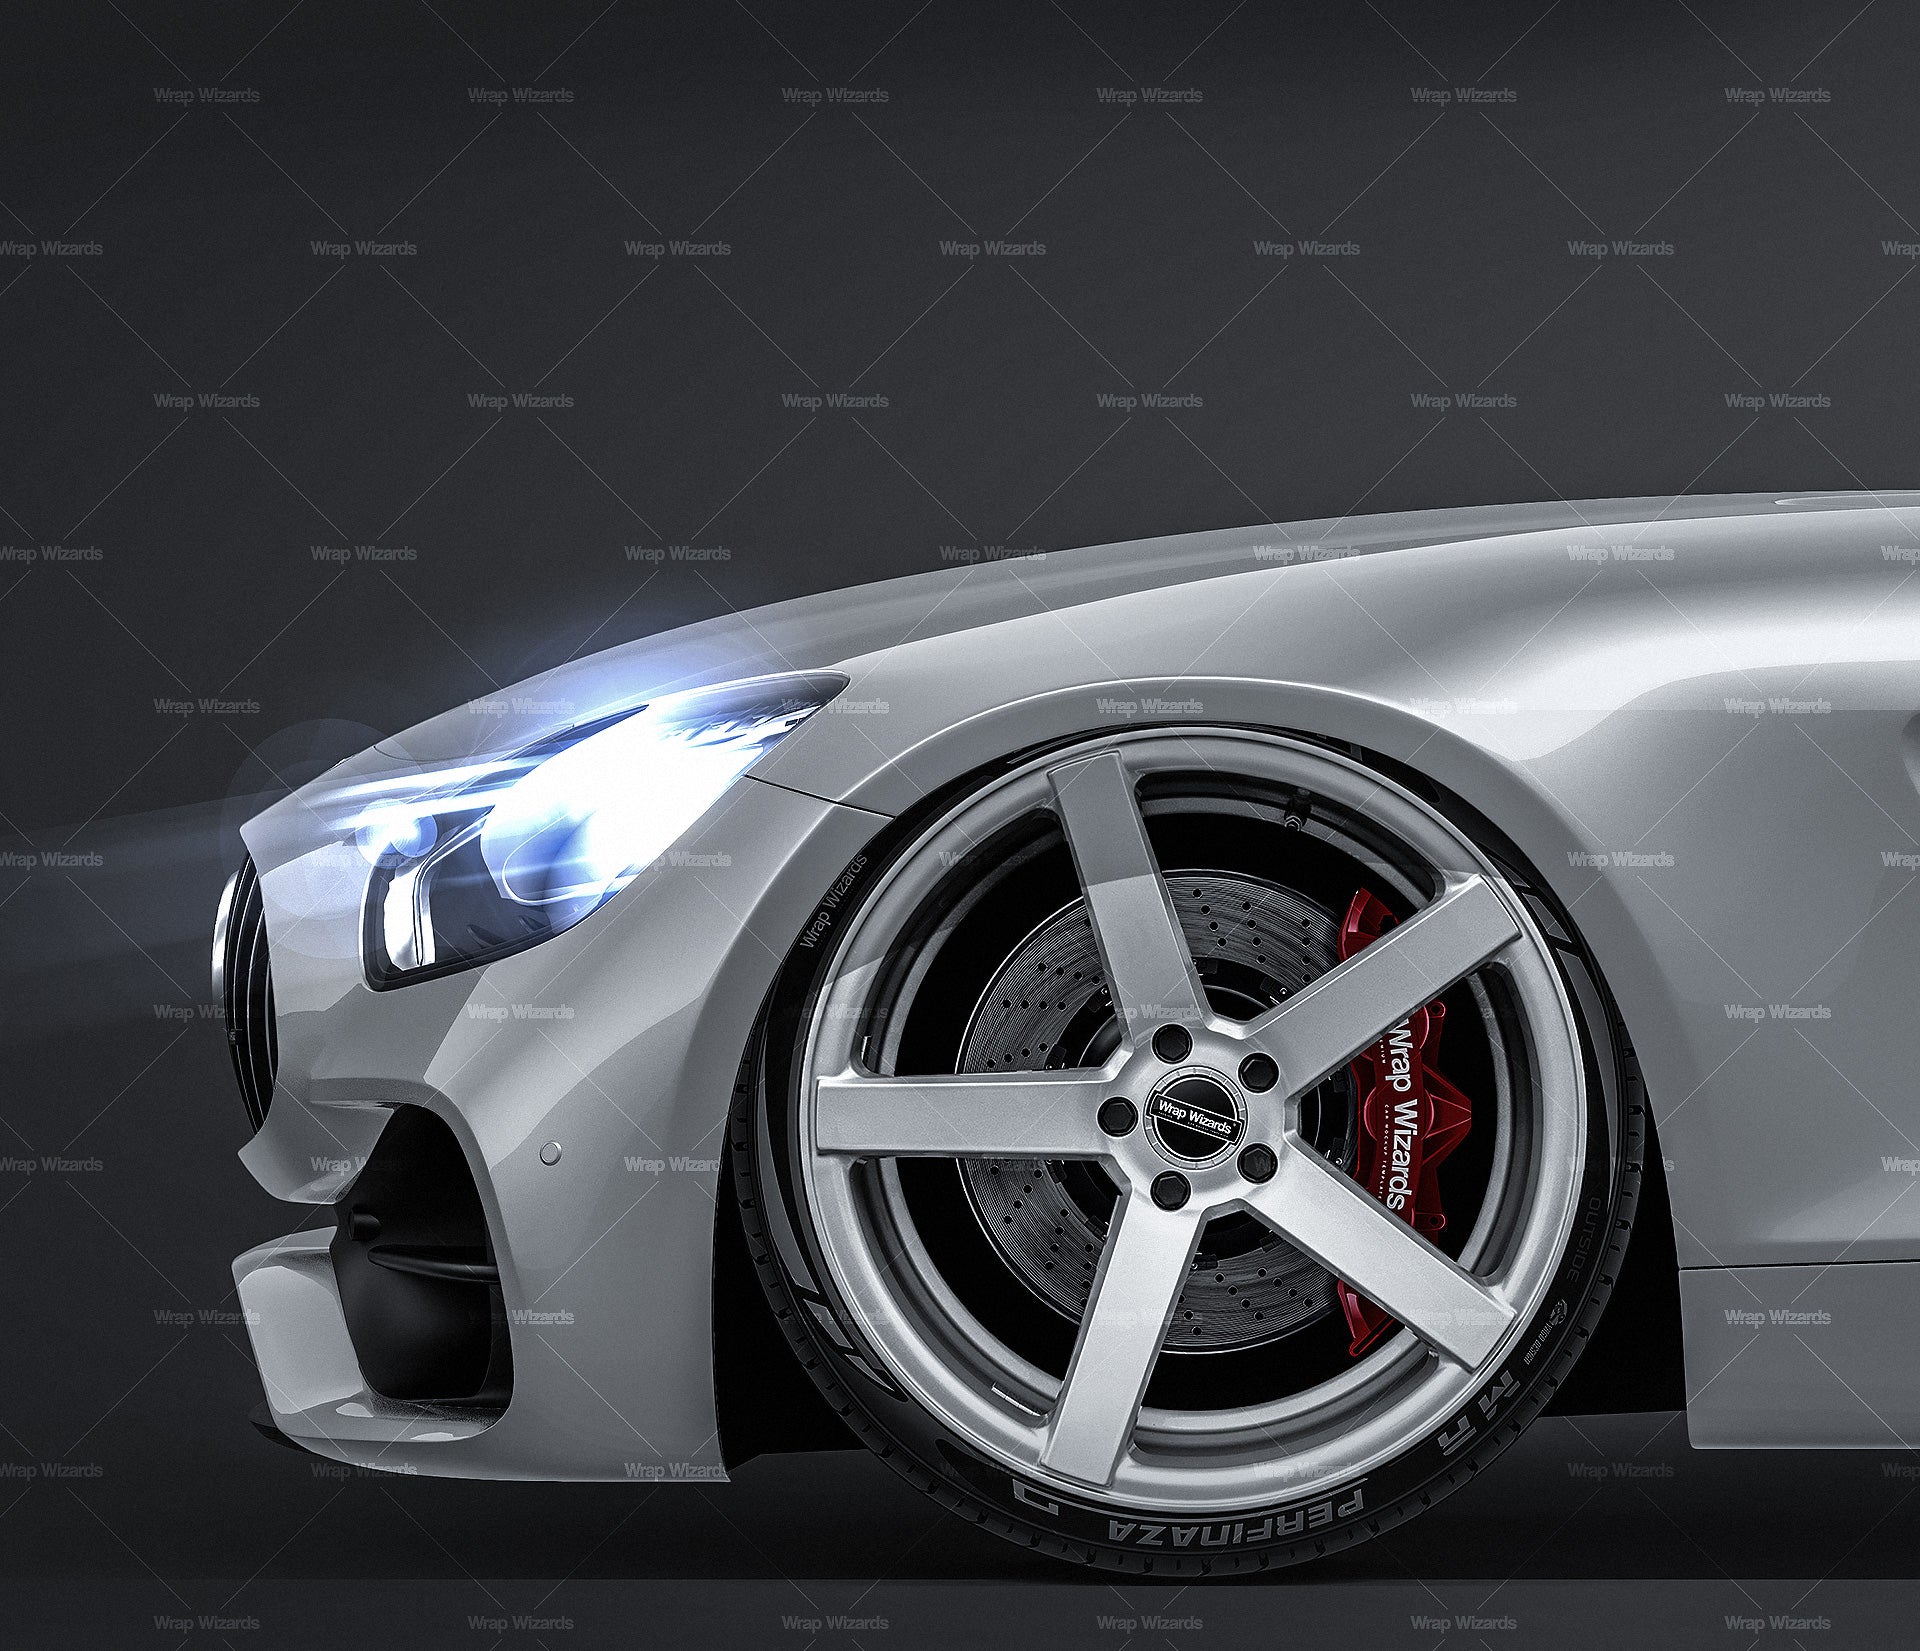 Mercedes-Benz AMG GT S 2018 glossy finish - all sides Car Mockup Template.psd